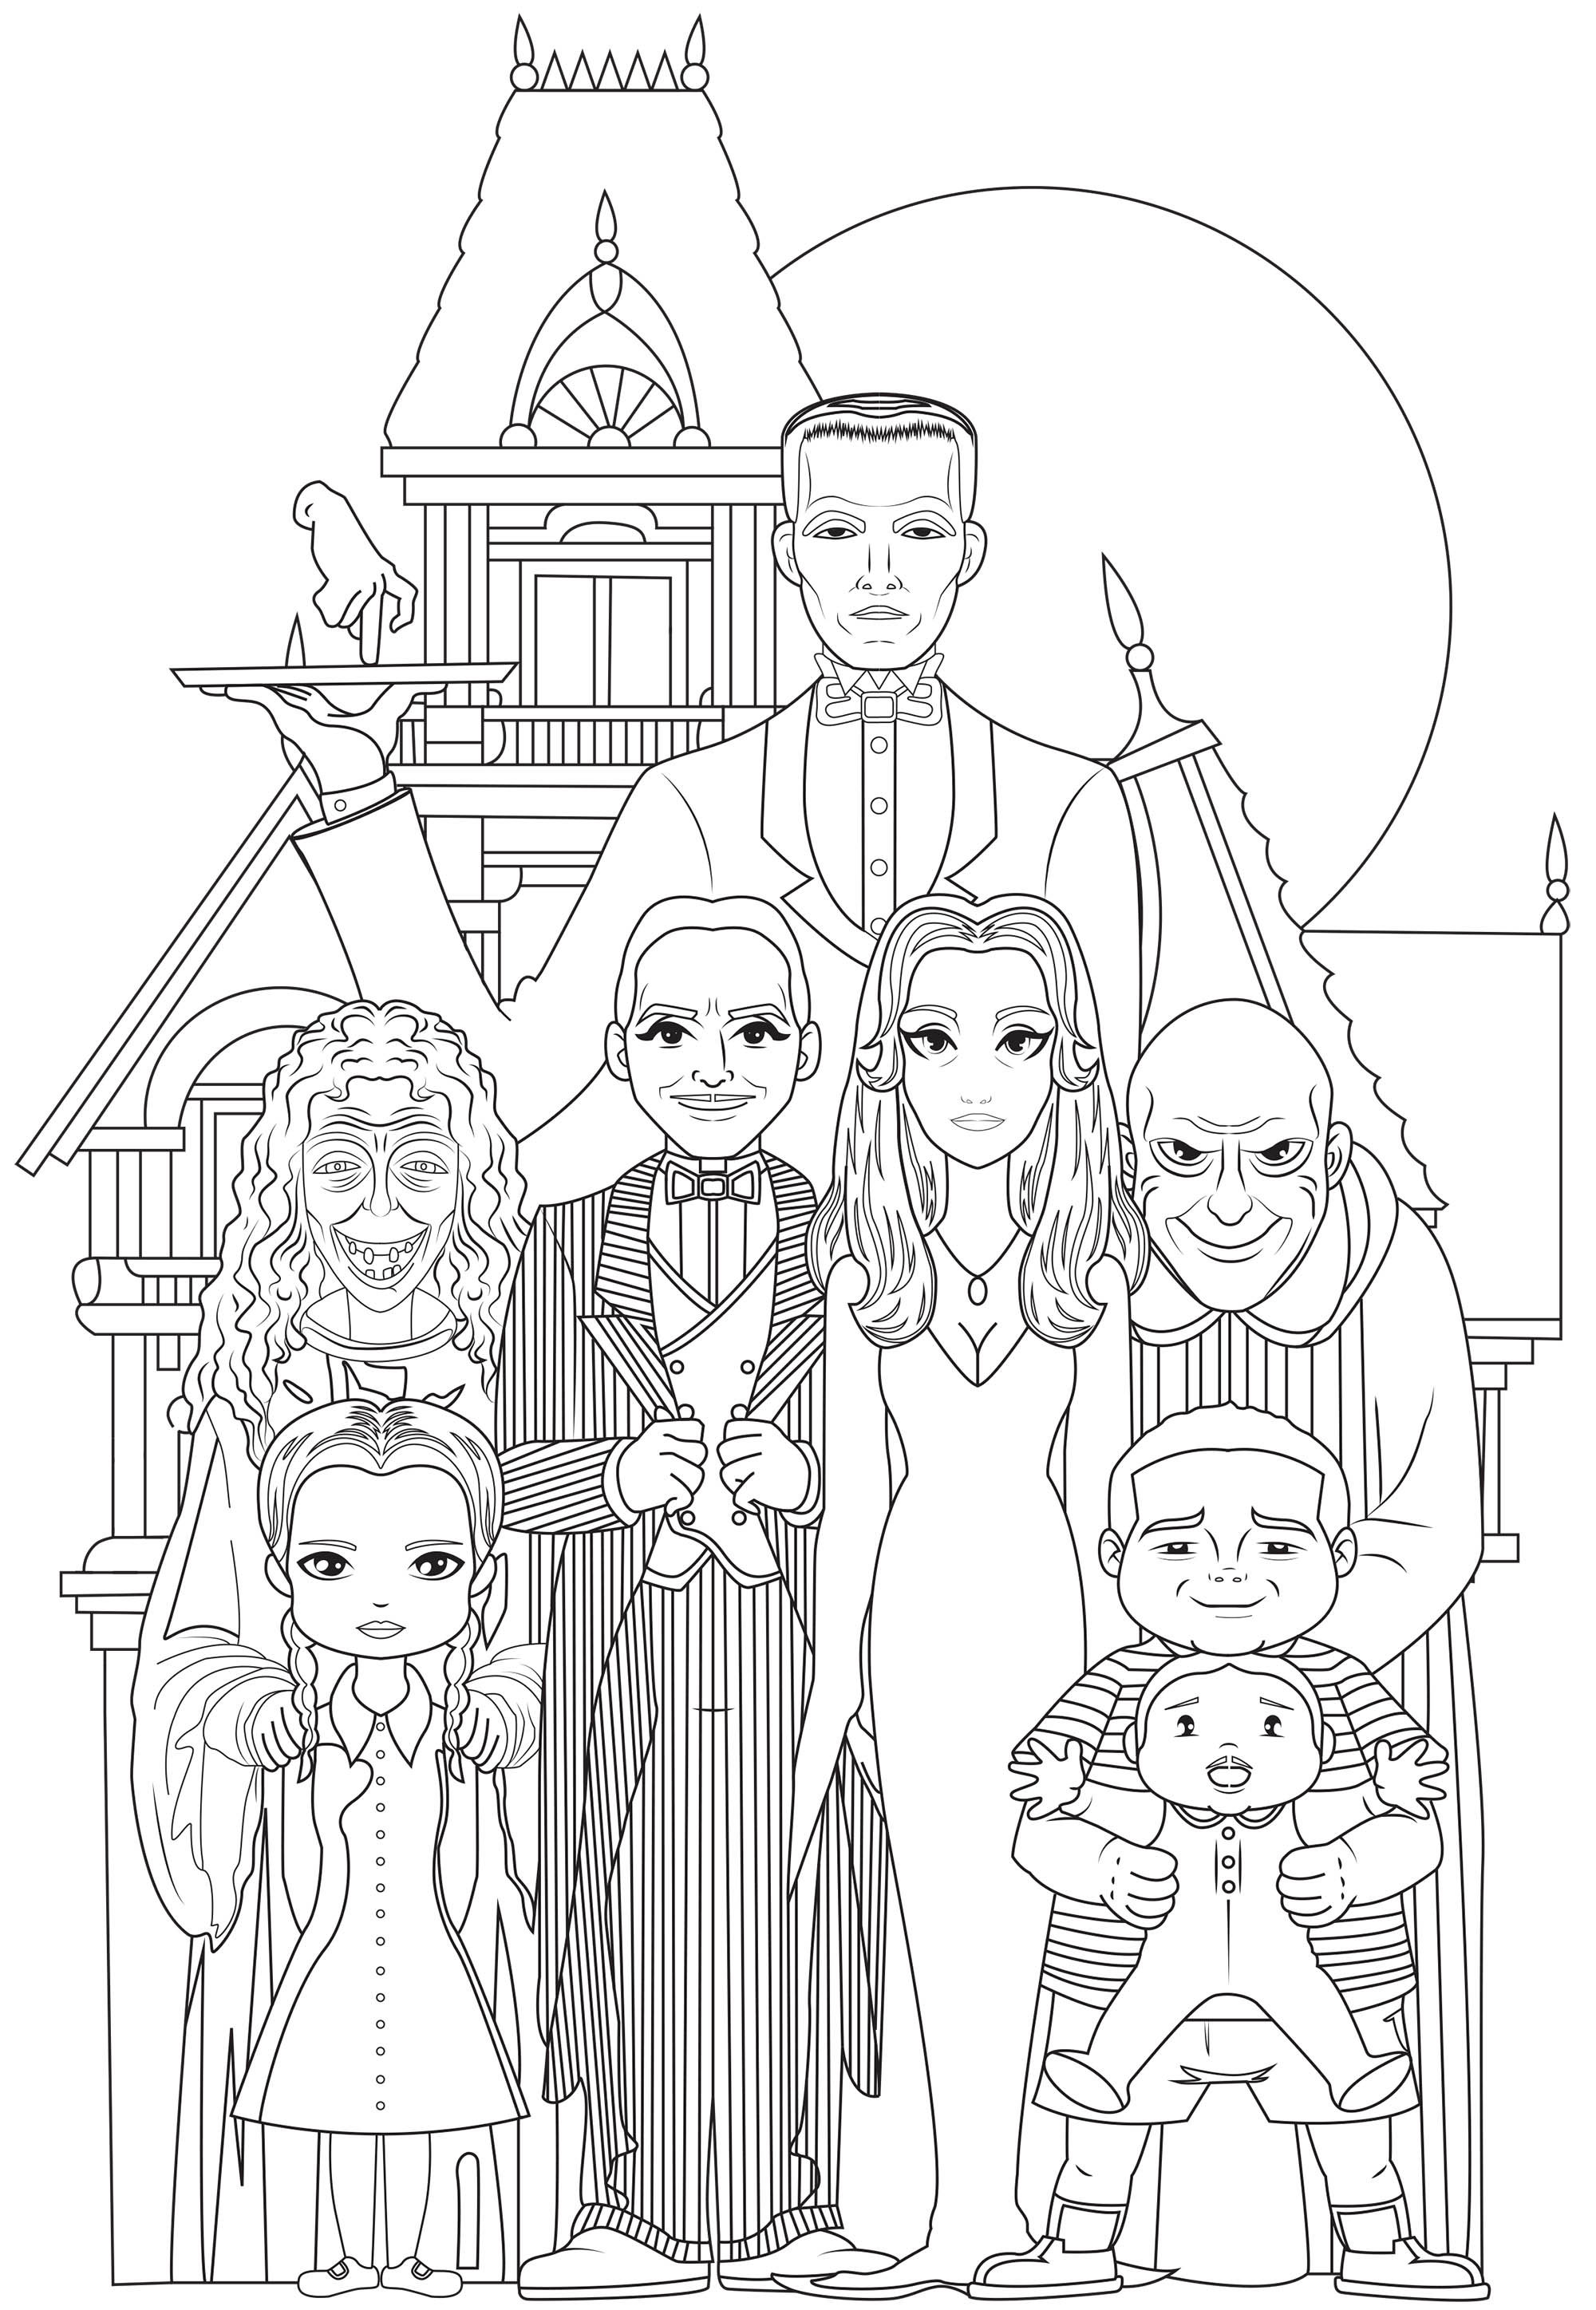 The whole Addams Family : Gomez and Morticia Addams, their children Wednesday and Pugsley, Uncle Fester and Grandmama, their butler Lurch, the disembodied hand Thing, and Gomez's Cousin Itt.